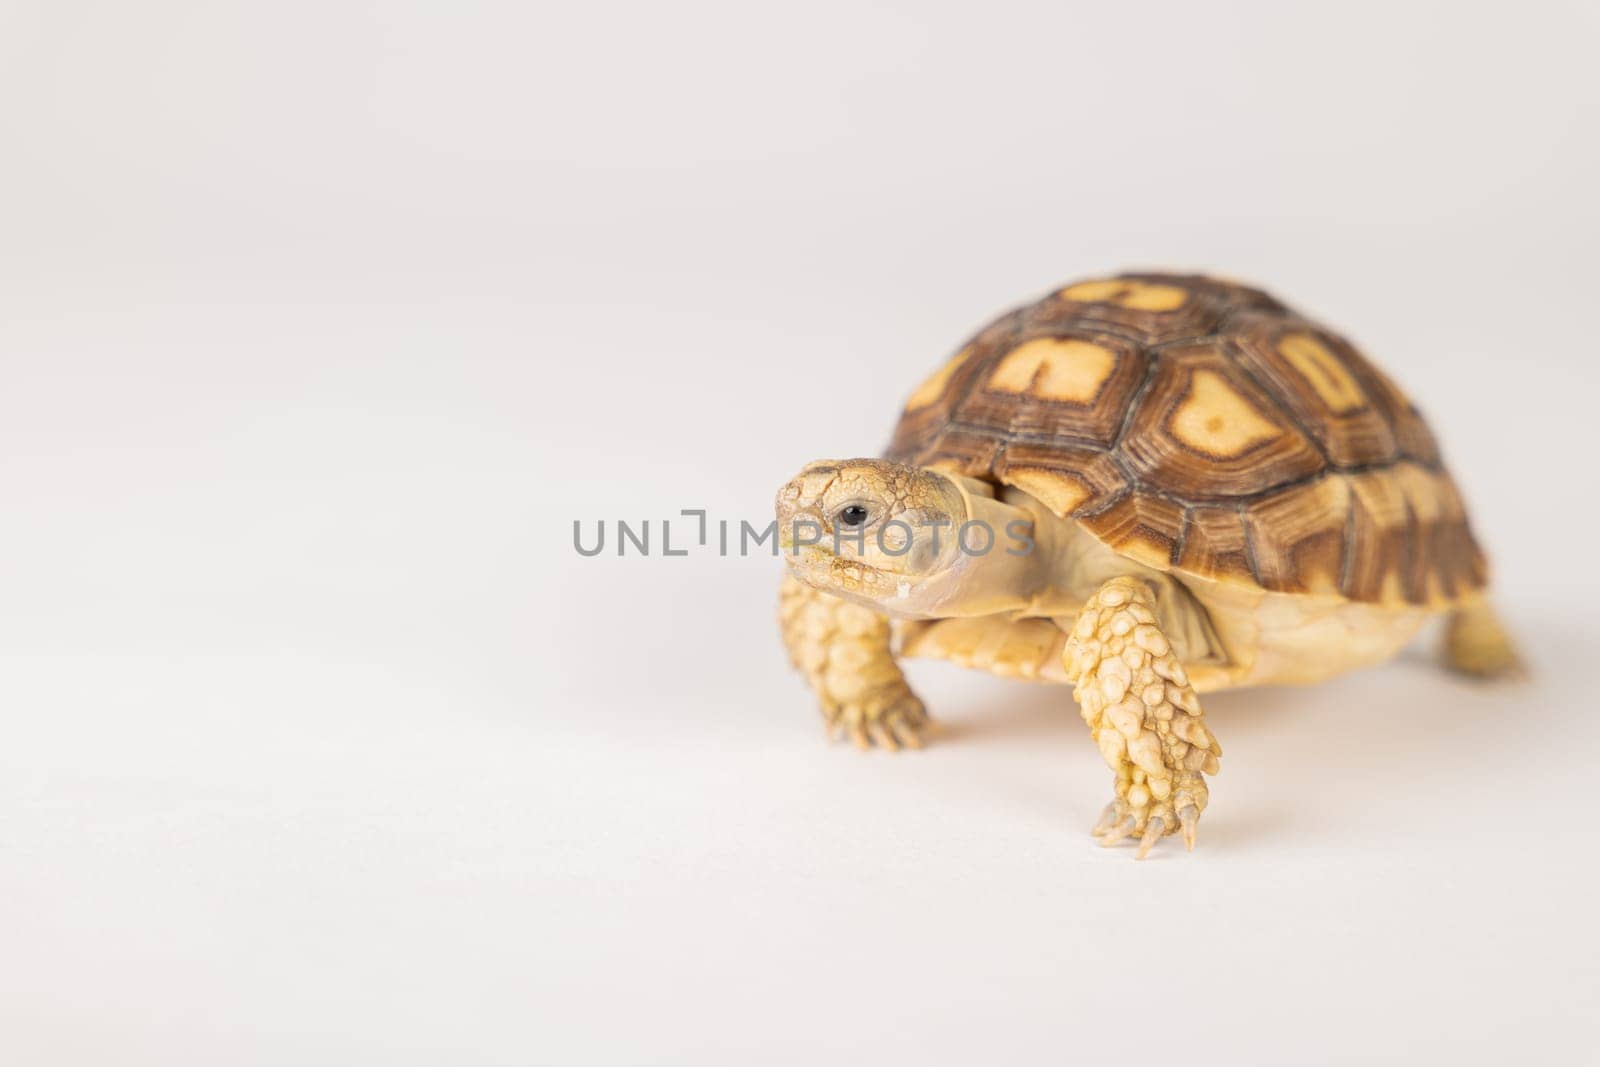 Meet the sulcata tortoise in this isolated portrait, emphasizing the beauty of its unique design and adorable features against a white background.